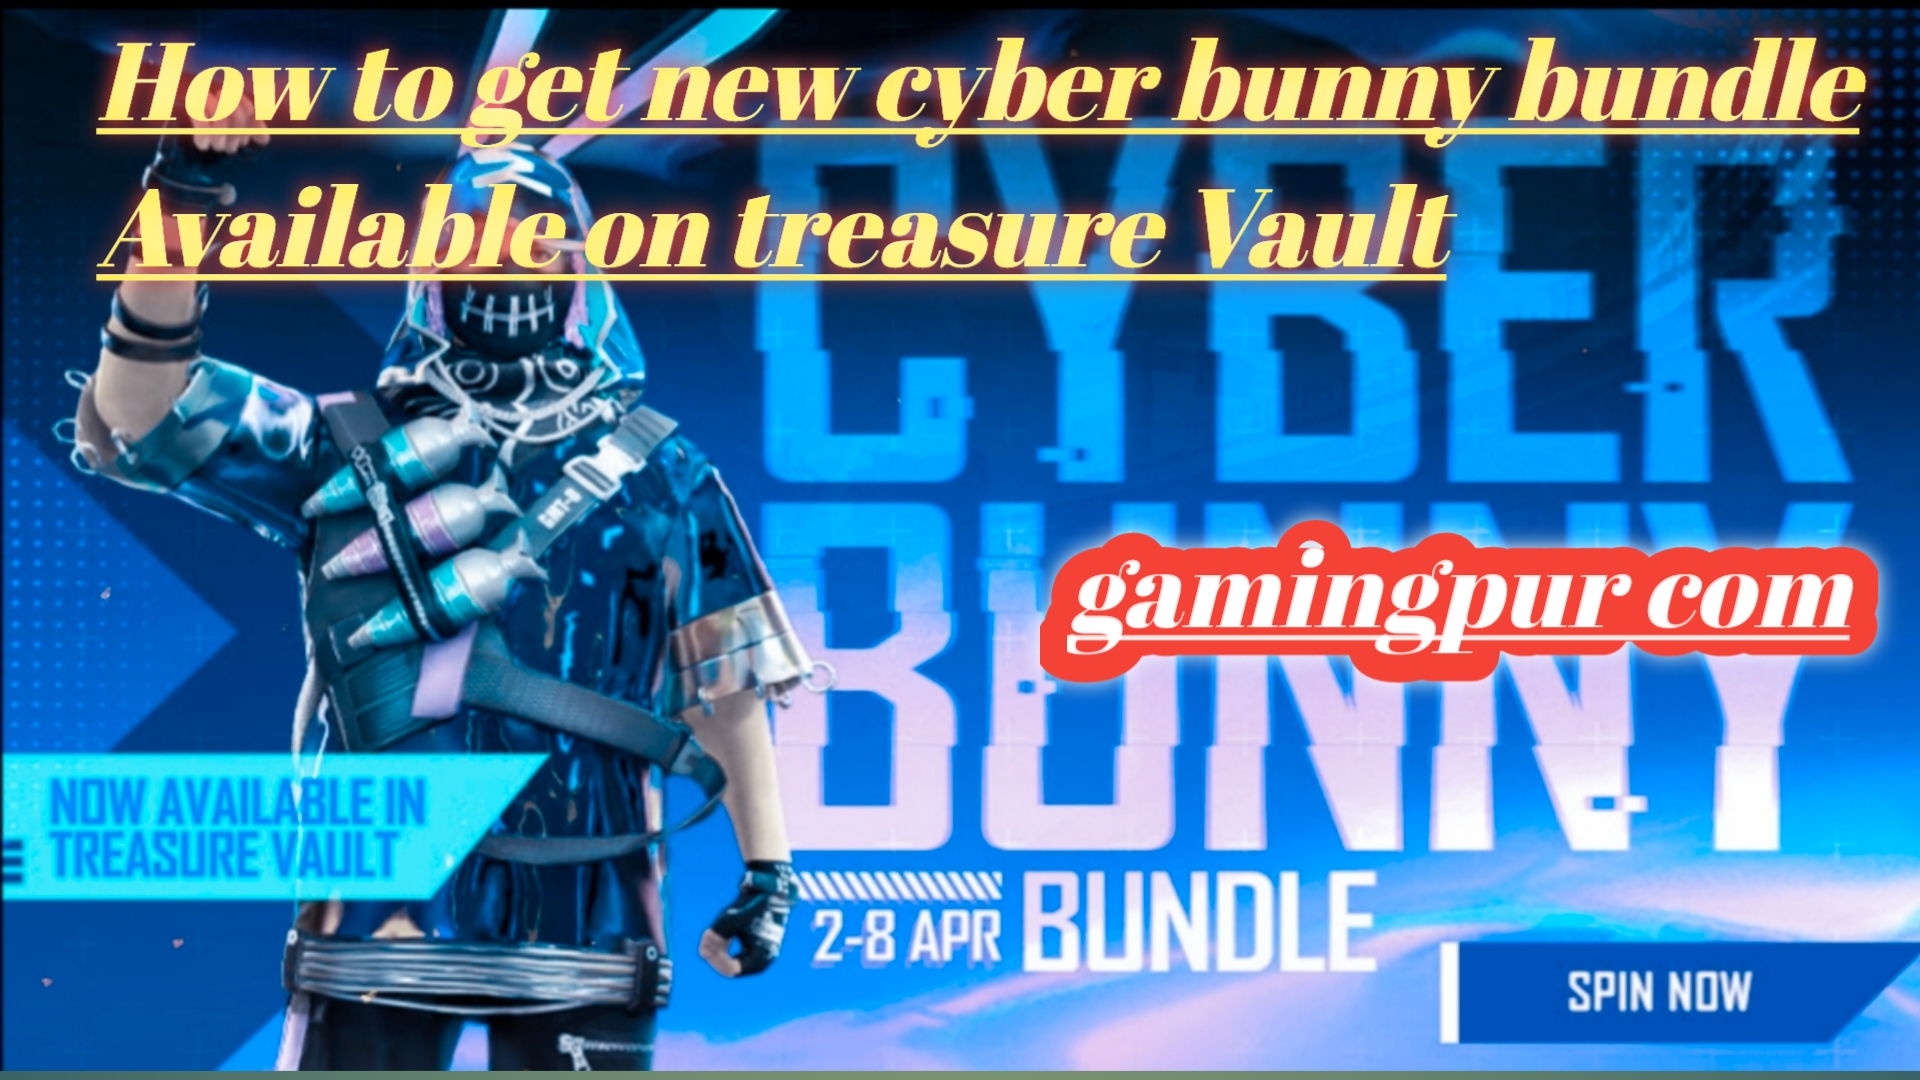 HOW TO GET NEW CYBER BUNNY BUNDLE